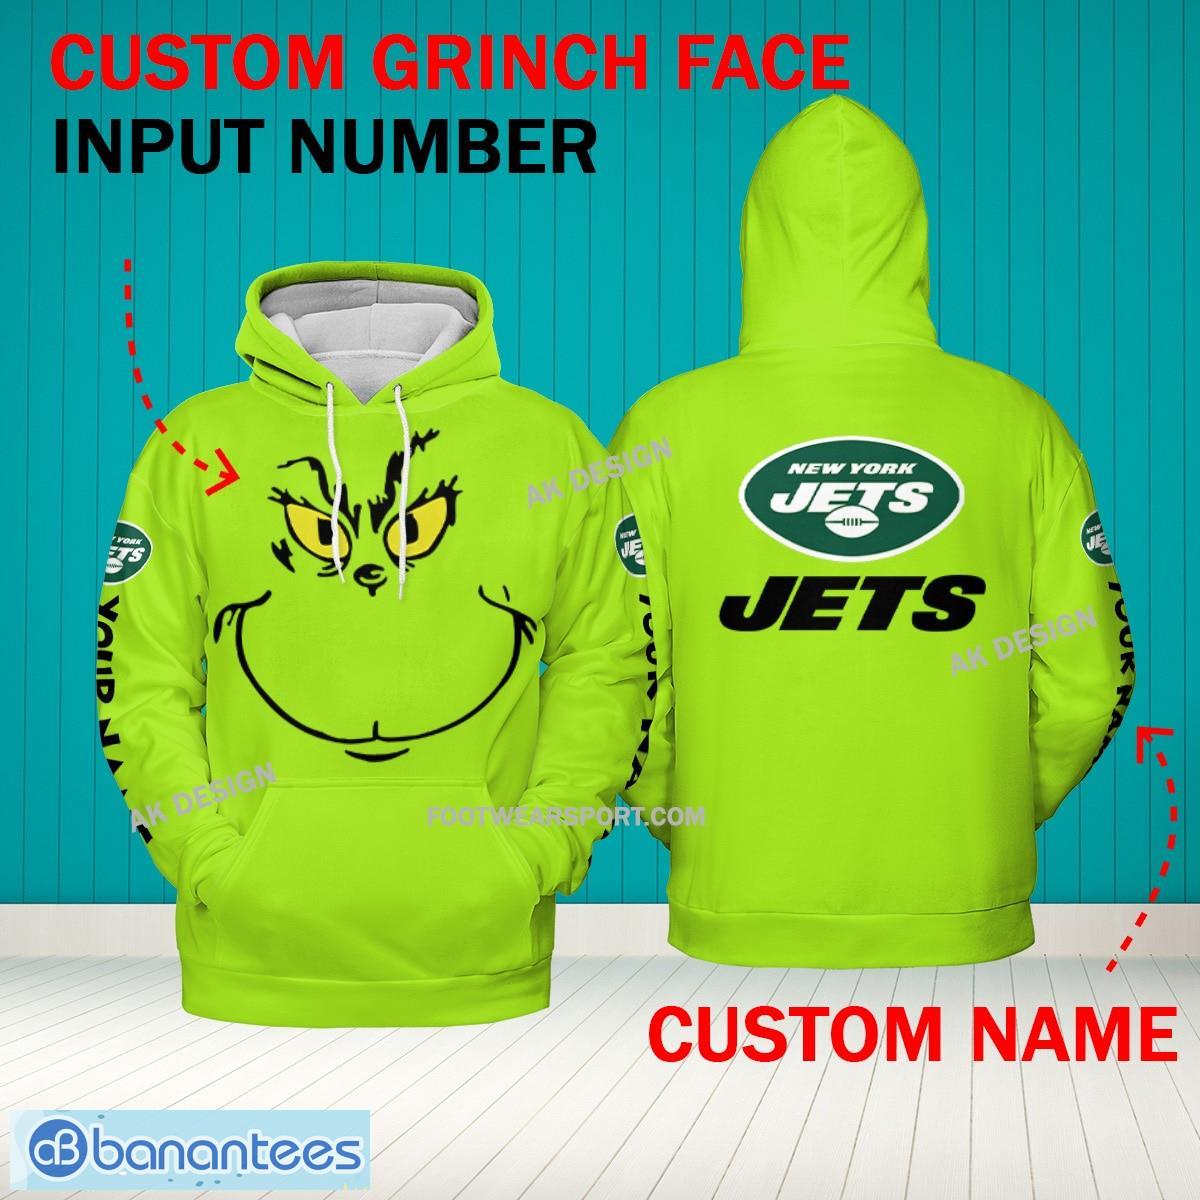 Grinch Face New York Jets 3D Hoodie, Zip Hoodie, Sweater Green AOP Custom Number And Name - Grinch Face NFL New York Jets 3D Hoodie